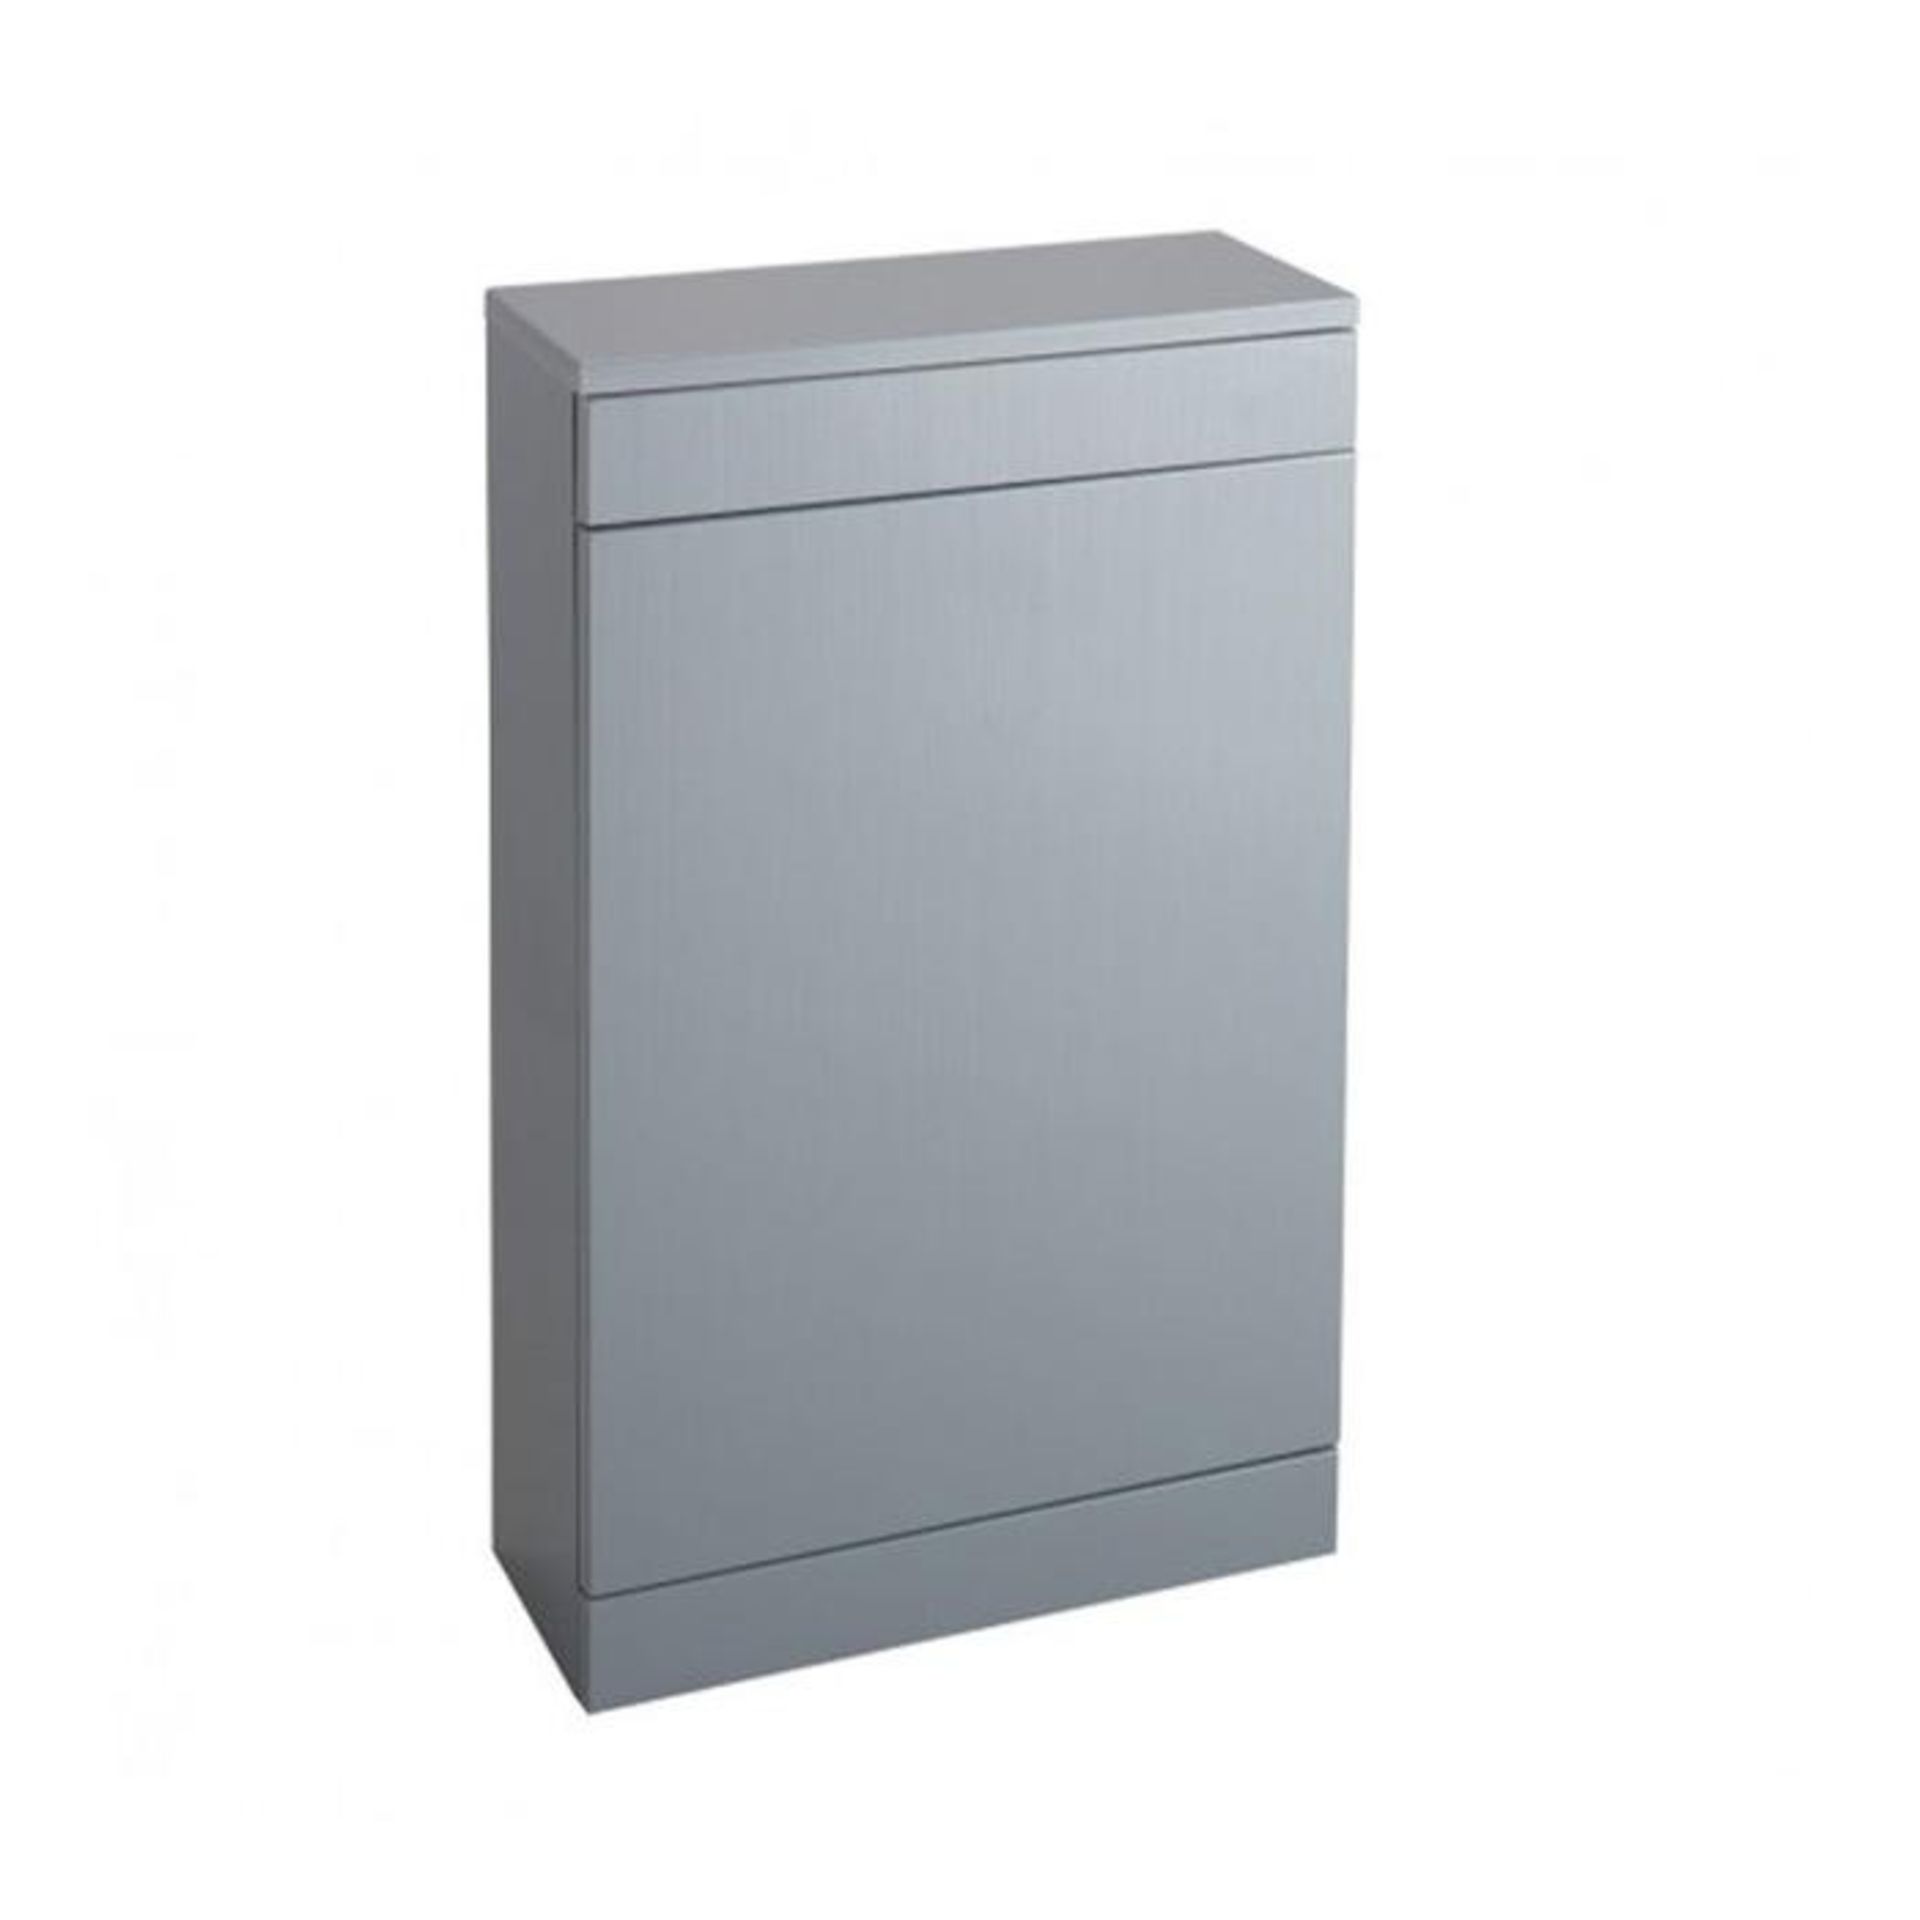 (XX193) 500mm Cassellie Idon WC Unit. RRP £241.99. Clean elegant contemporary design Made f...